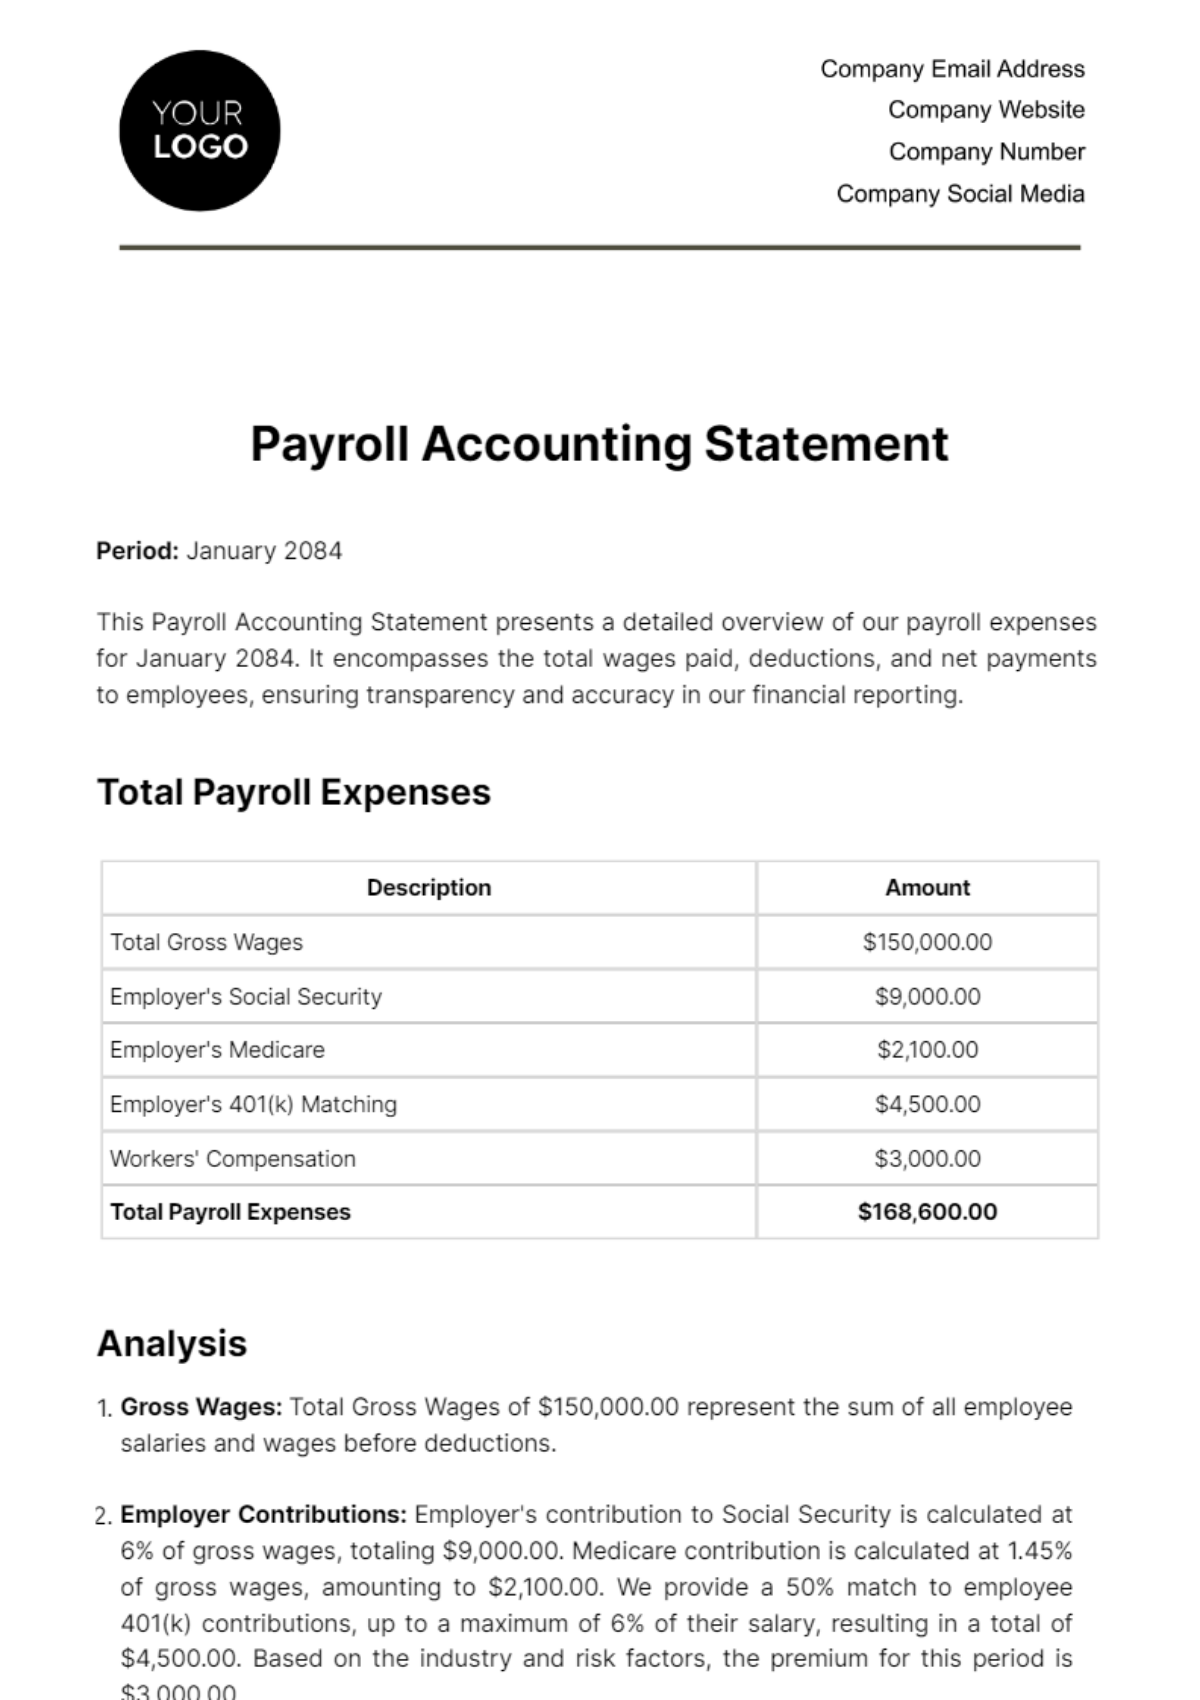 Free Payroll Accounting Statement Template